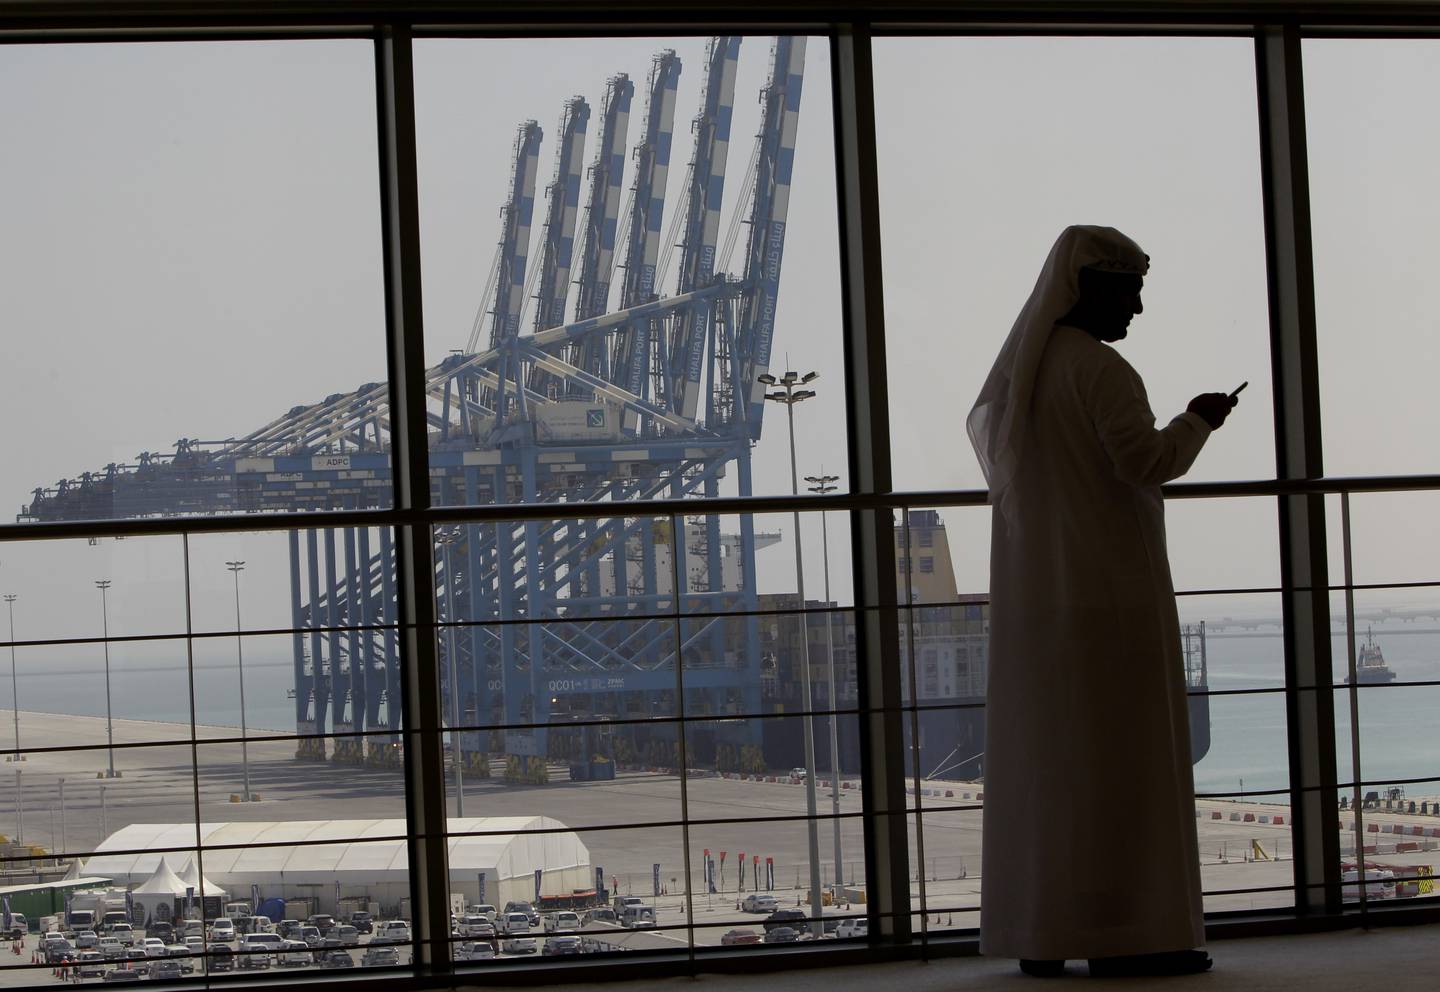 An Emirati official takes part in the opening ceremony of the first phase of the Khalifa port, southwest of Abu Dhabi, United Arab Emirates on September 1, 2012. Abu Dhabi Ports Group began trading for the first time on February  8, 2022 on Abu Dhabi's stock exchange. AP